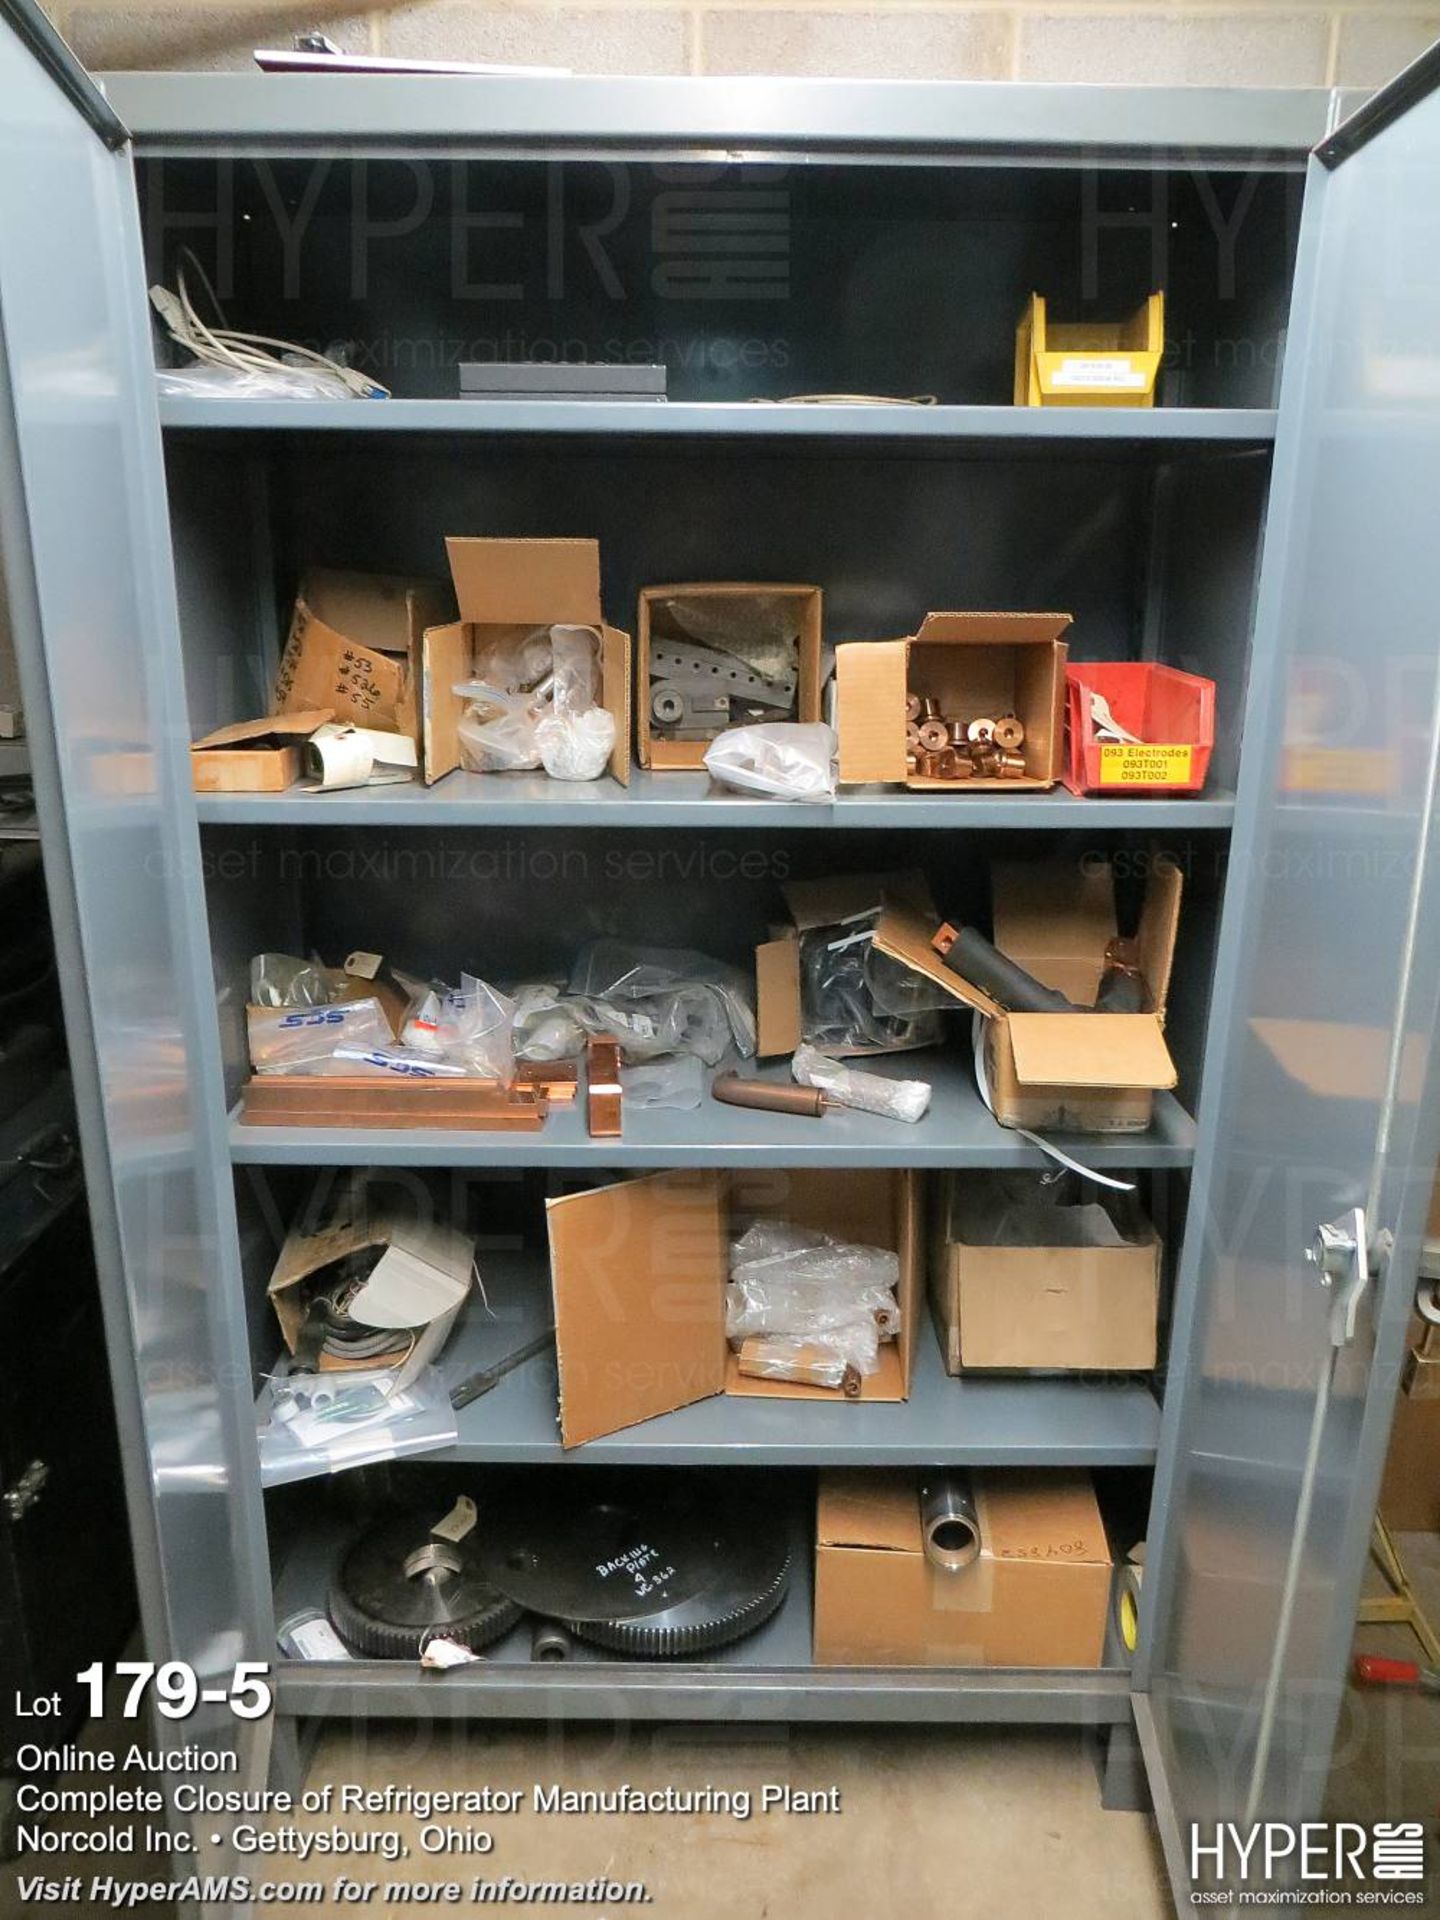 (lot) various MRO parts and supplies in room - Image 6 of 18